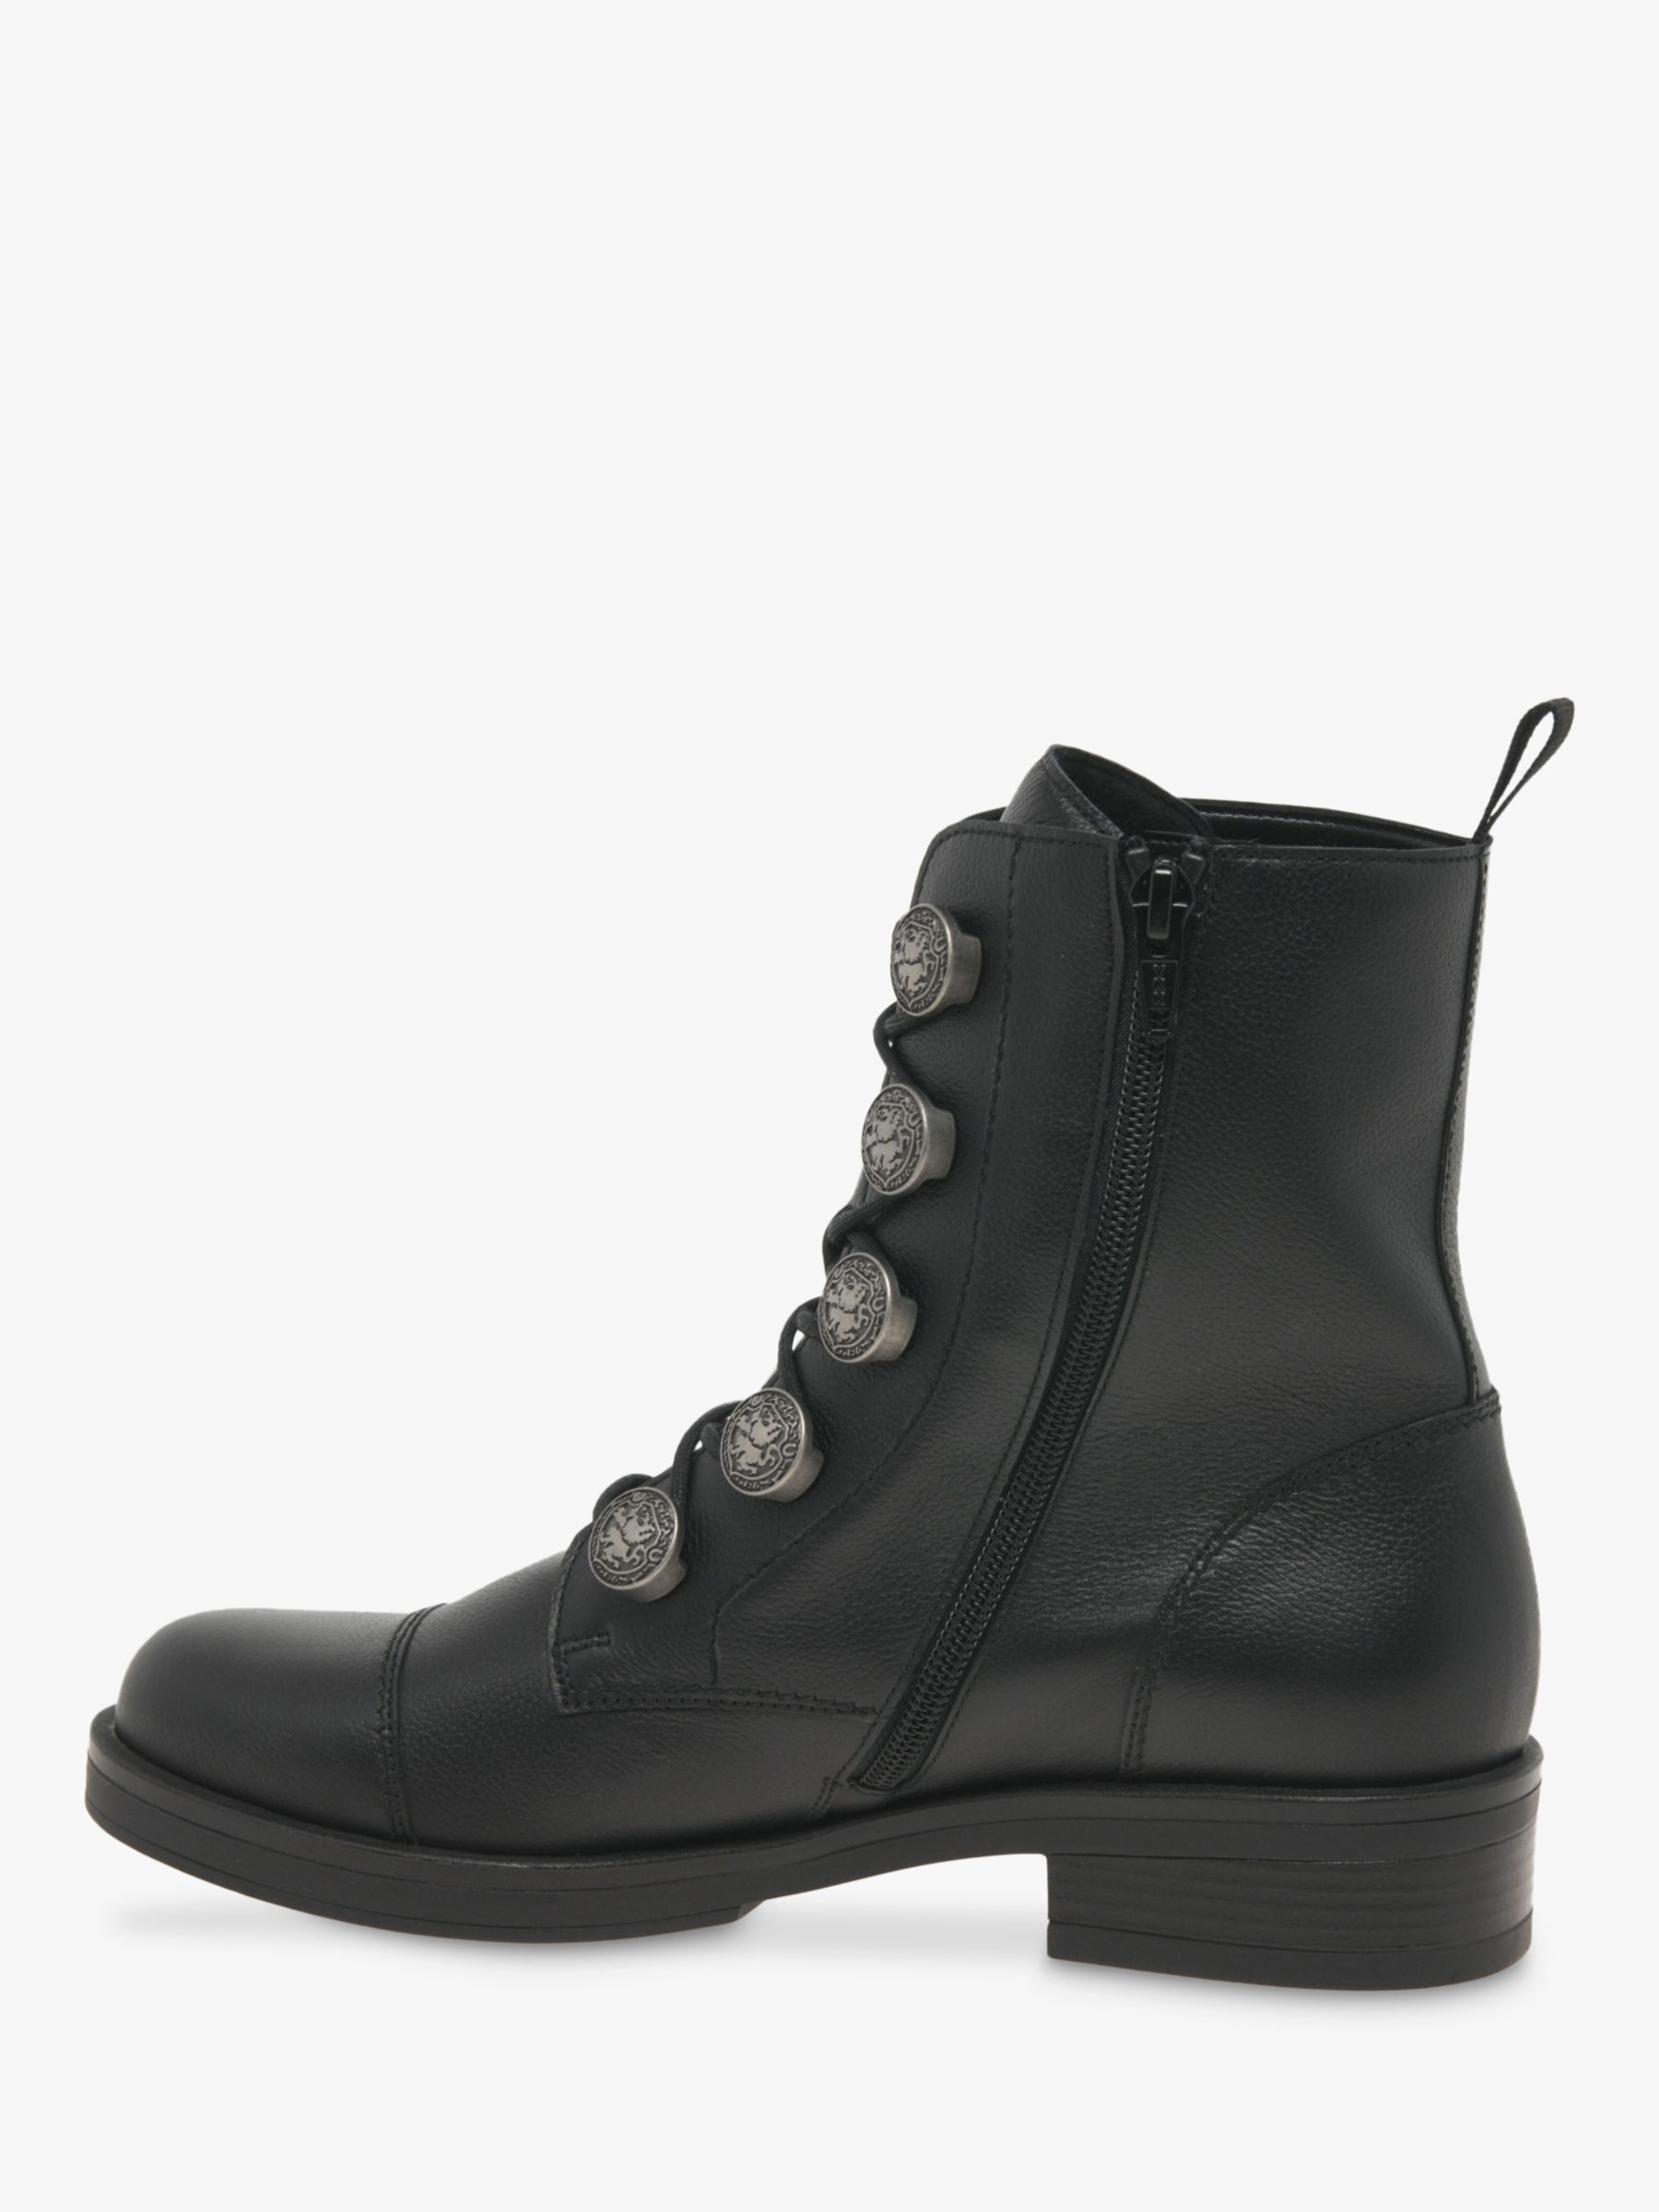 Gabor Lady Leather Military Button Ankle Boots, Black